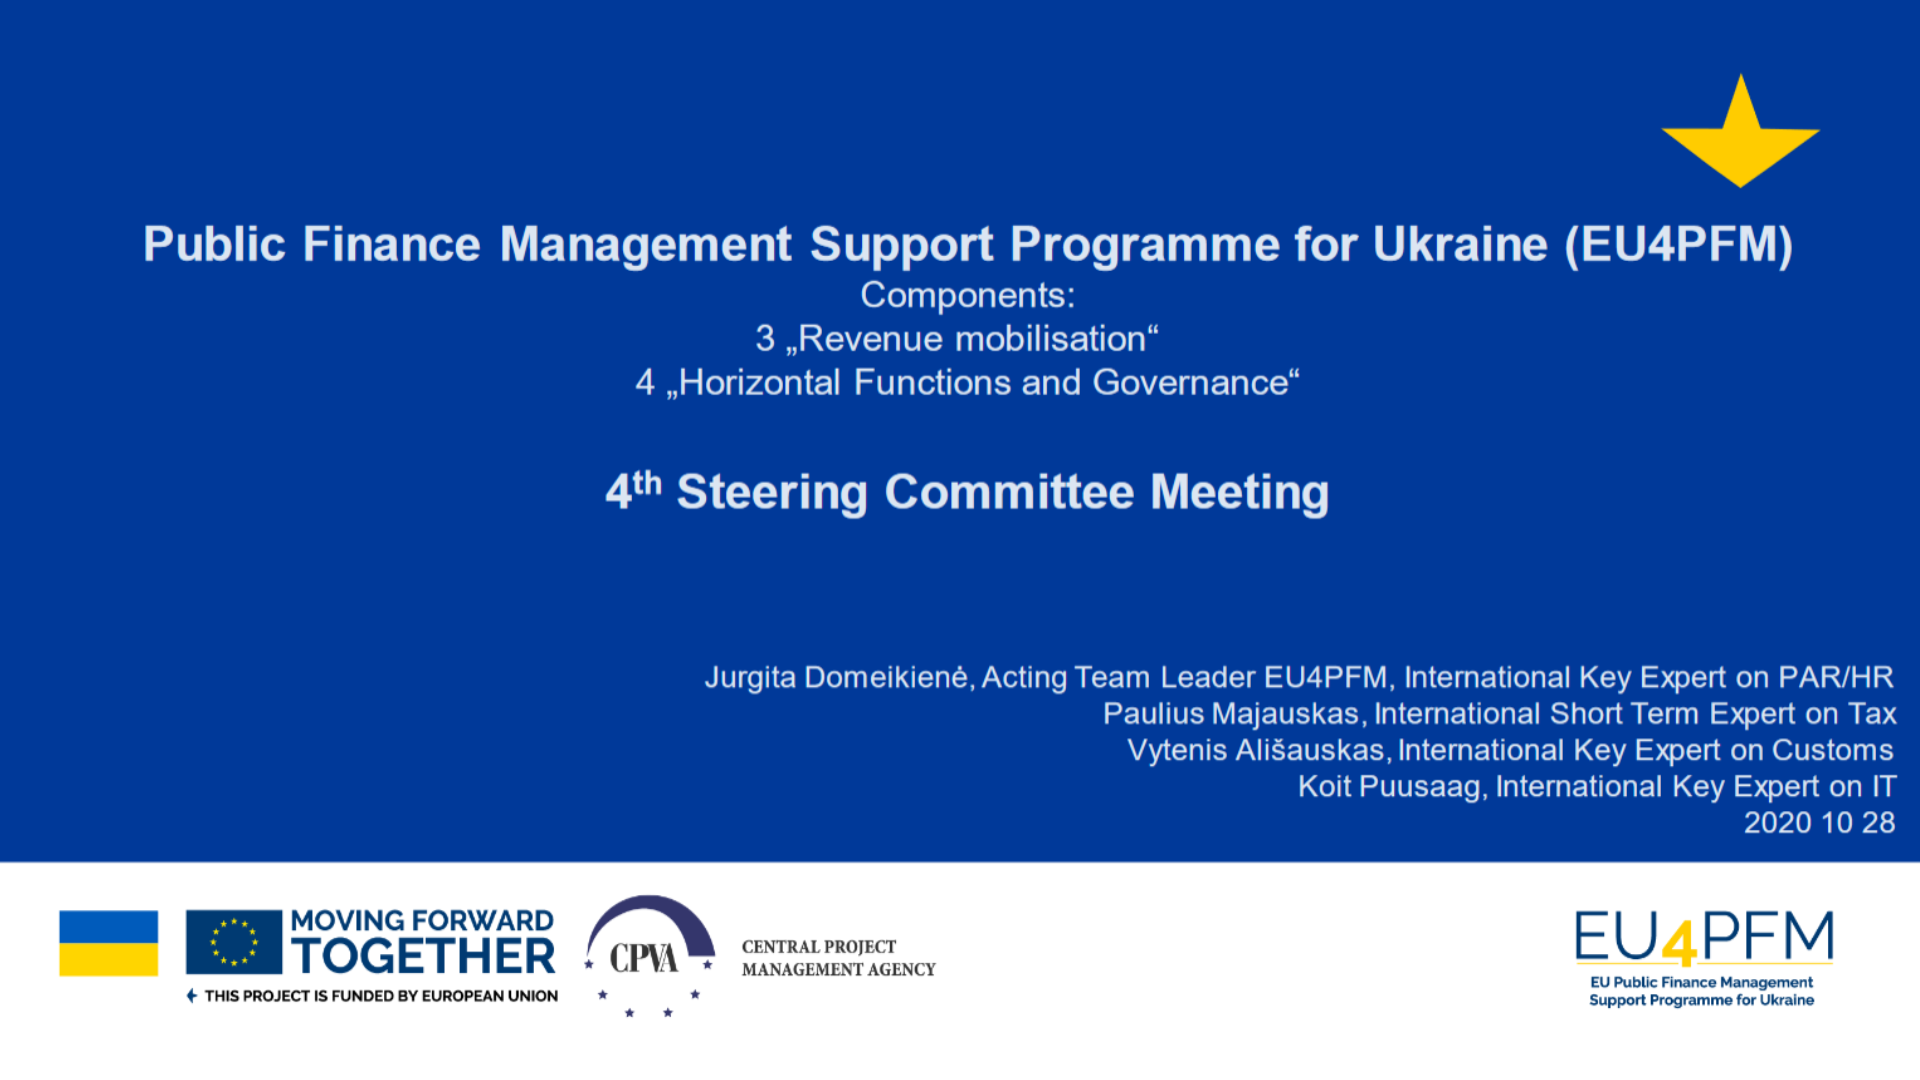 The 4th meeting of the EU4PFM Steering Committee took place